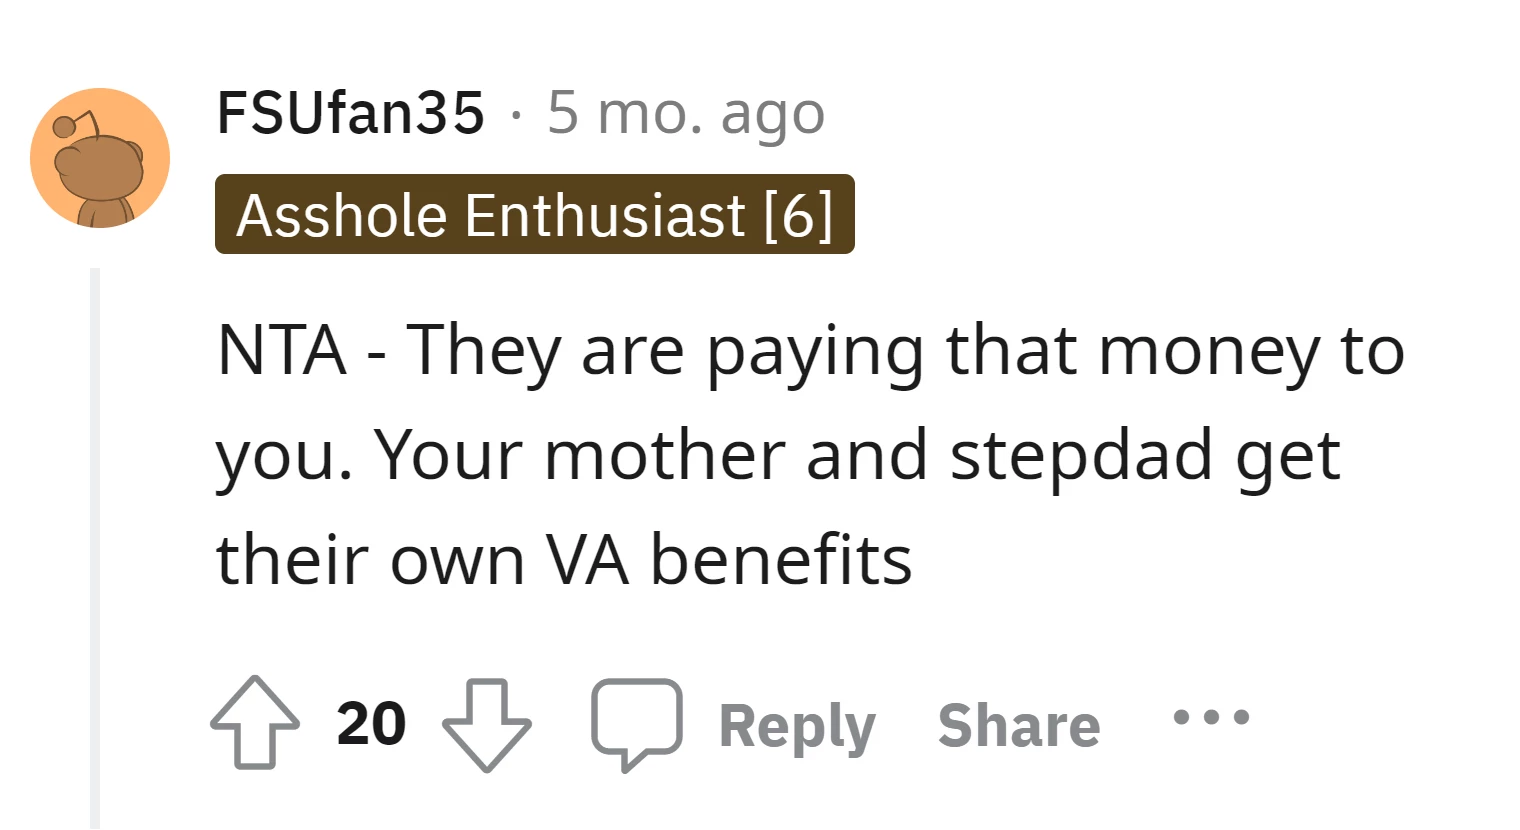 The Redditor is not in the wrong because the VA benefits are meant for her